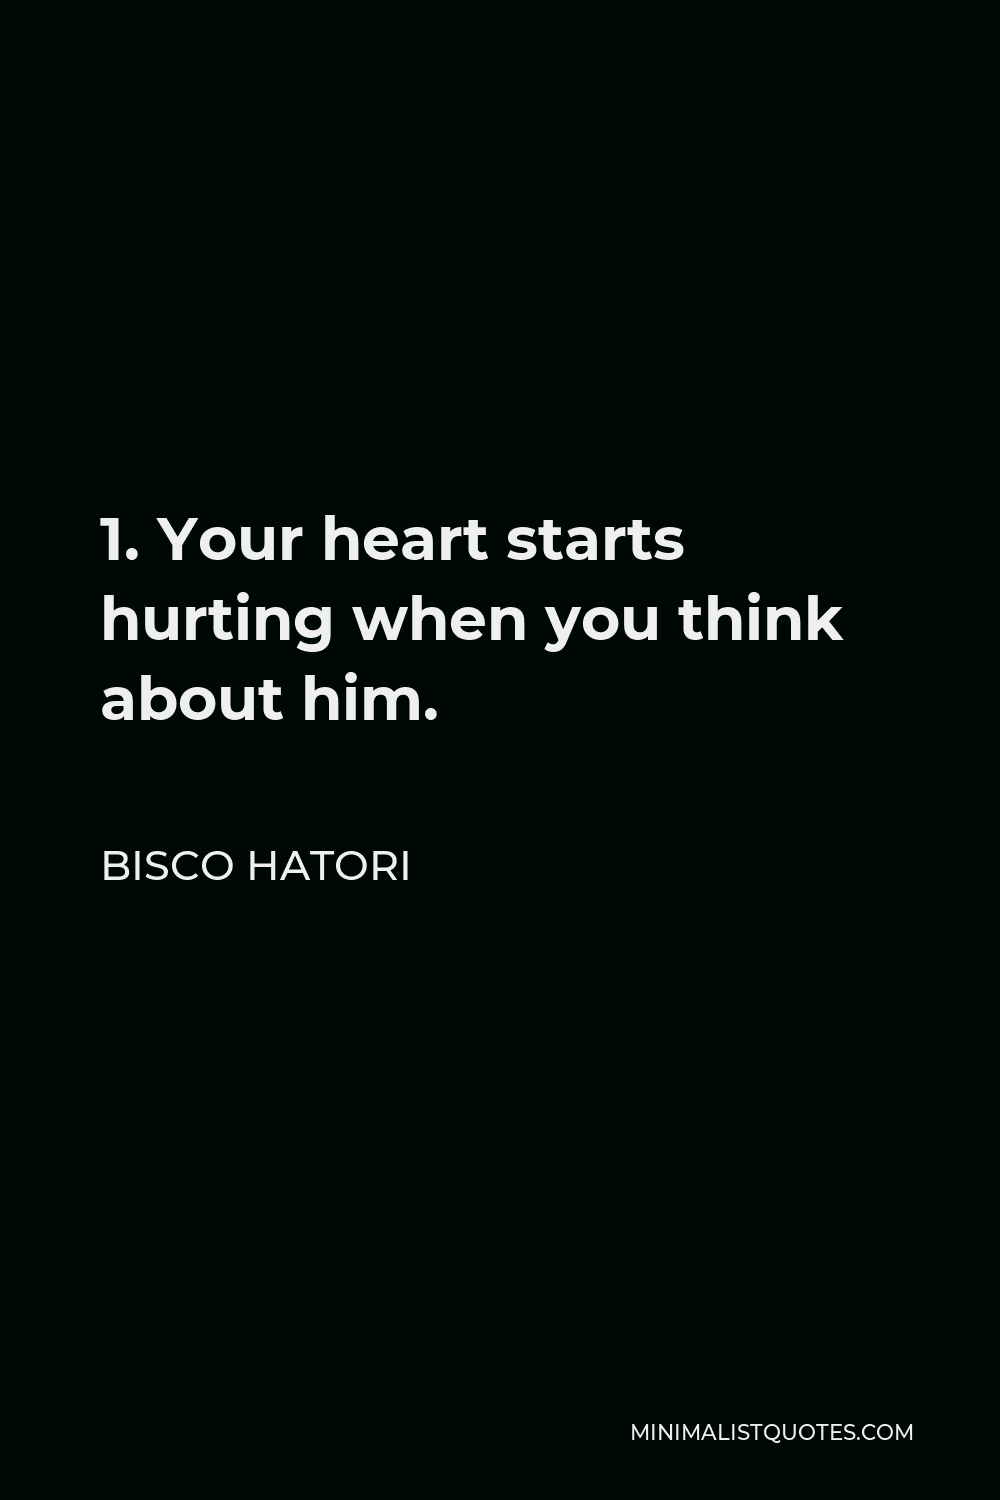 Bisco Hatori Quote - 1. Your heart starts hurting when you think about him.